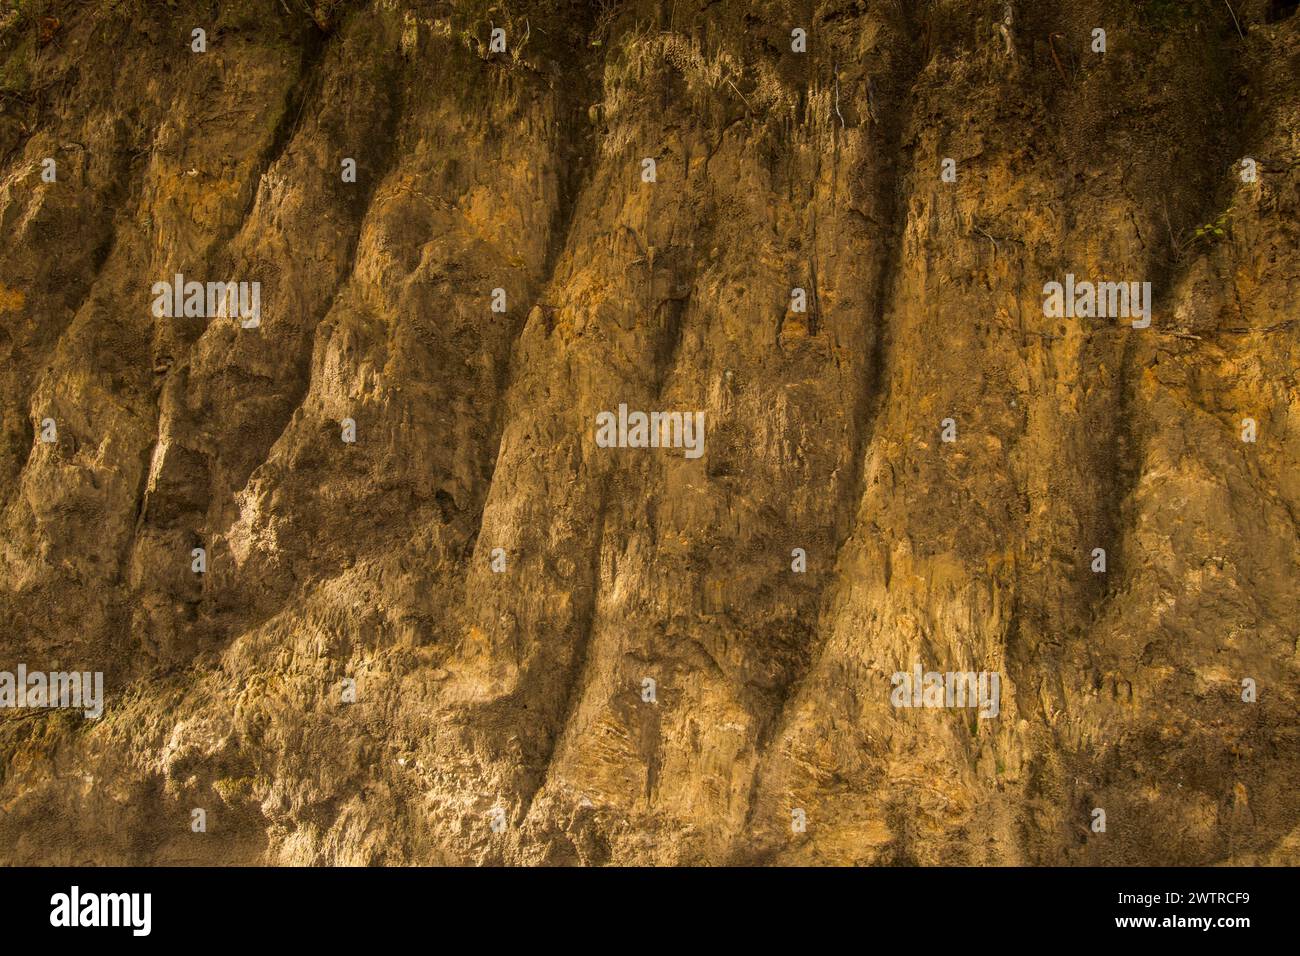 Close up view of a sand bank in a chesnut forest where the high content on clay is visible. Pujerra, Malaga province, Andalucia, Spain. Stock Photo